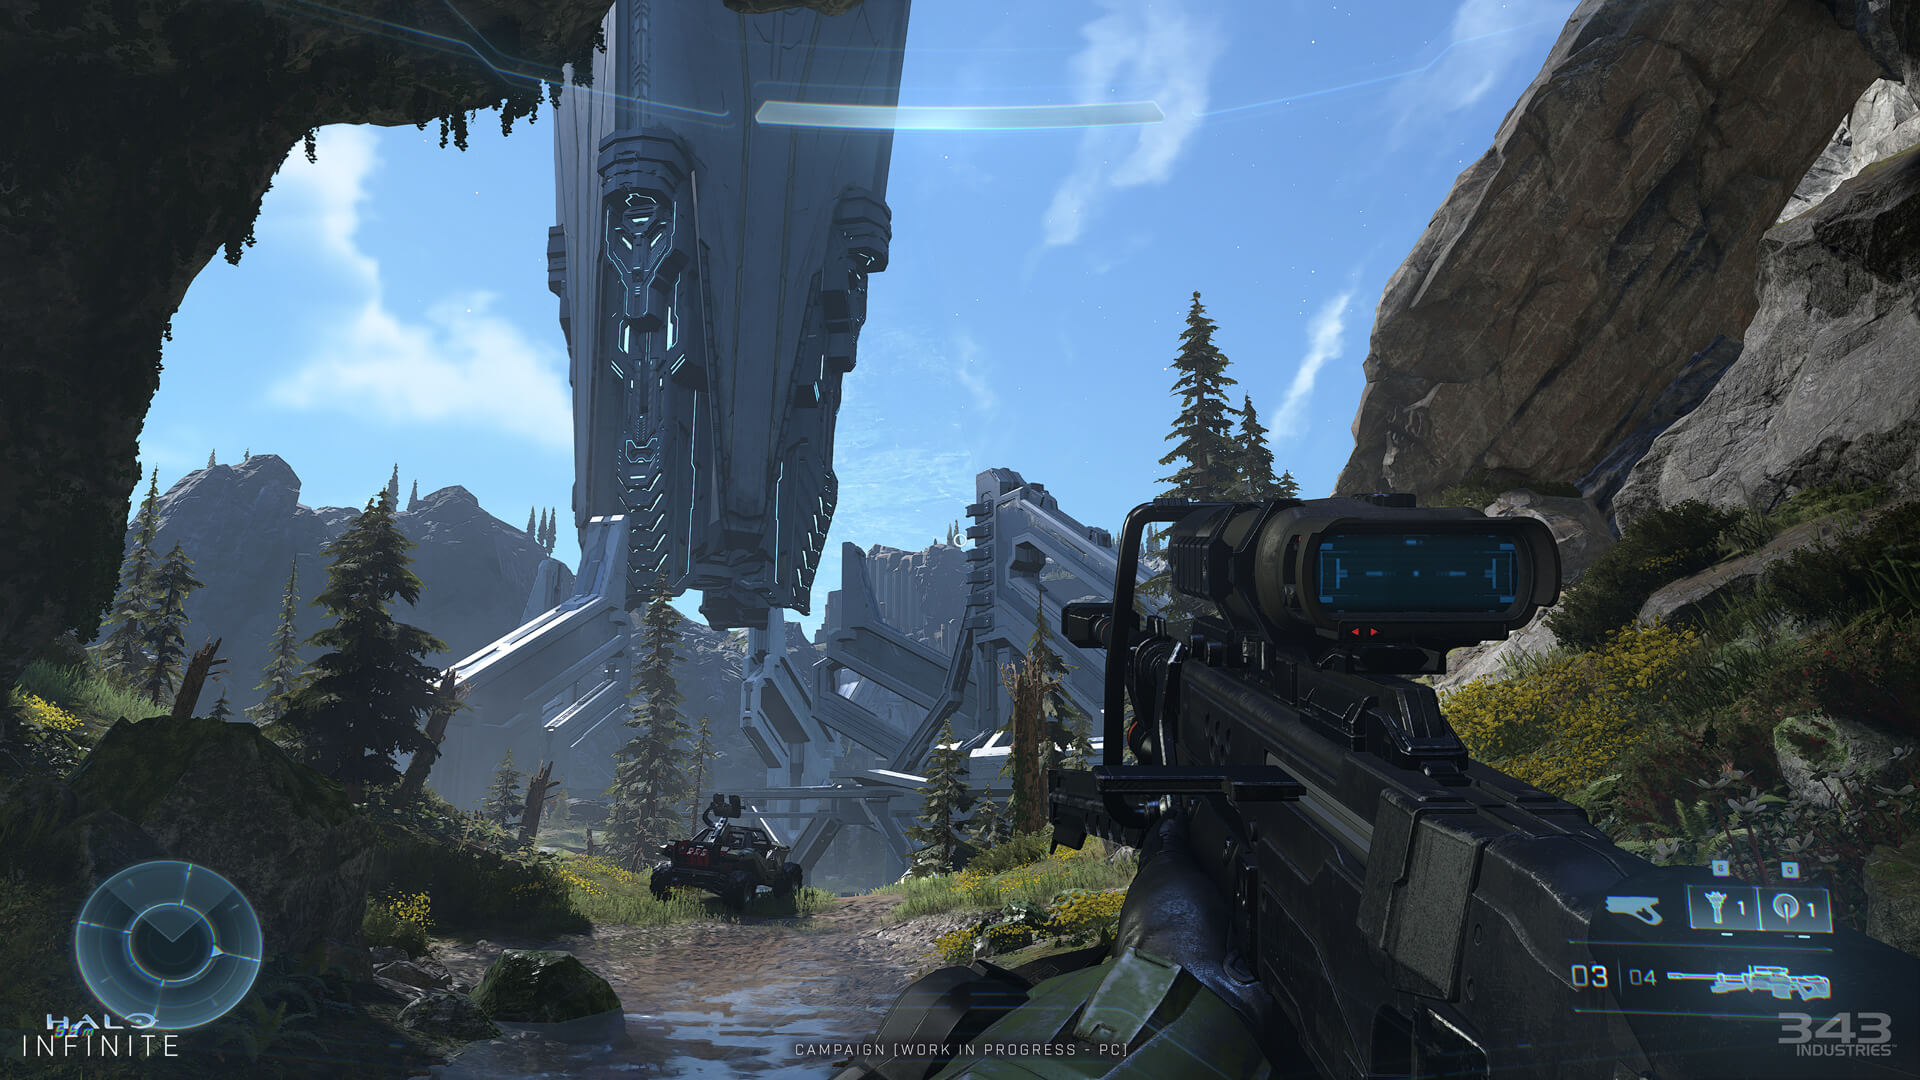 A screenshot from Halo Infinite showing the player holding a sniper rifle near a Warthog vehicle.